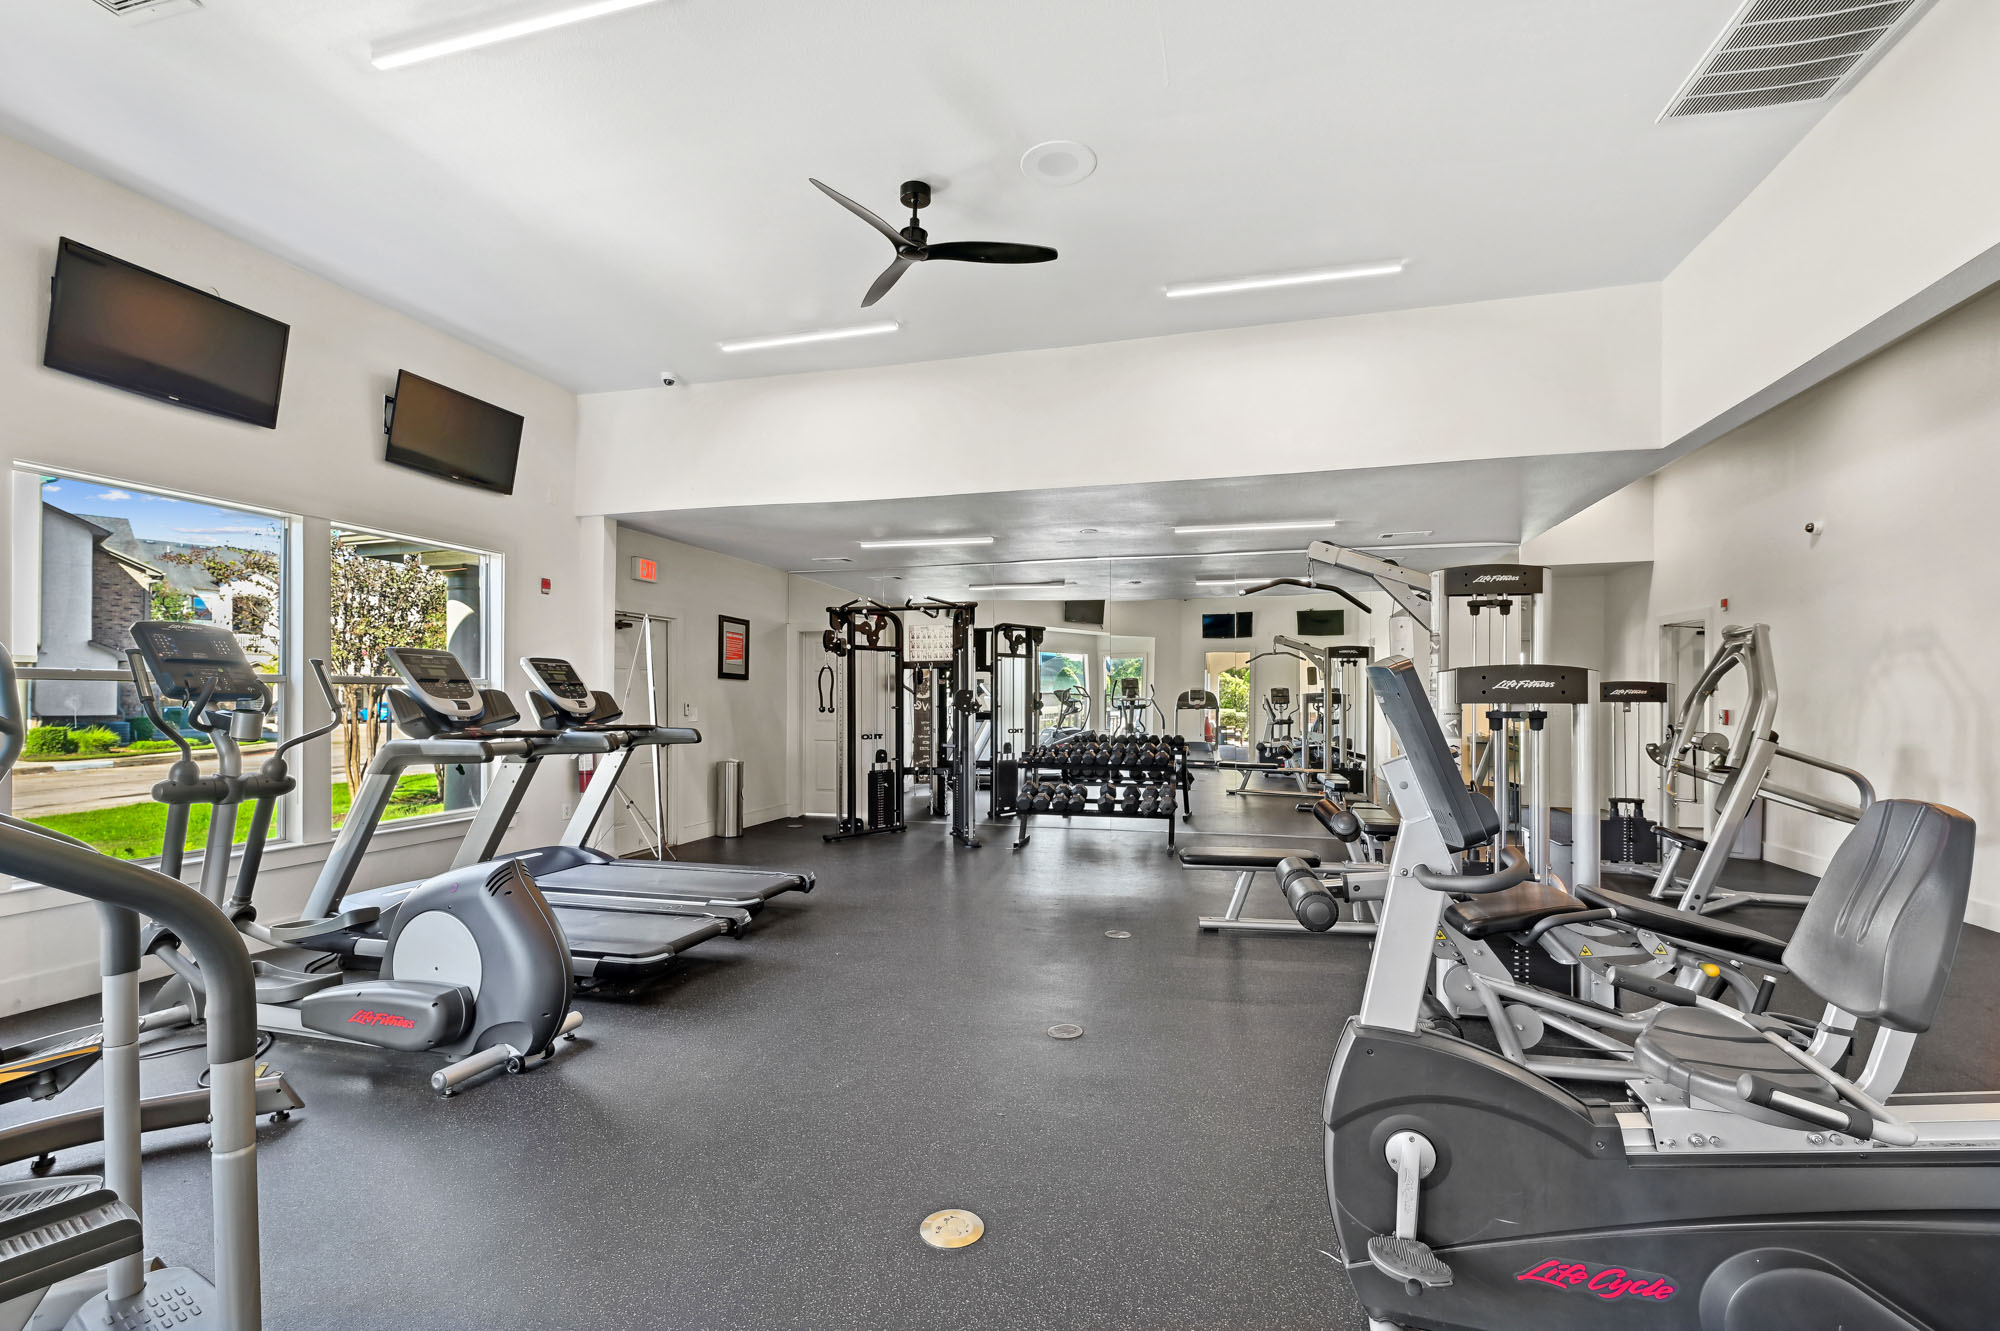 The fitness center at The Villas at Shadow Creek apartments in Houston, TX.